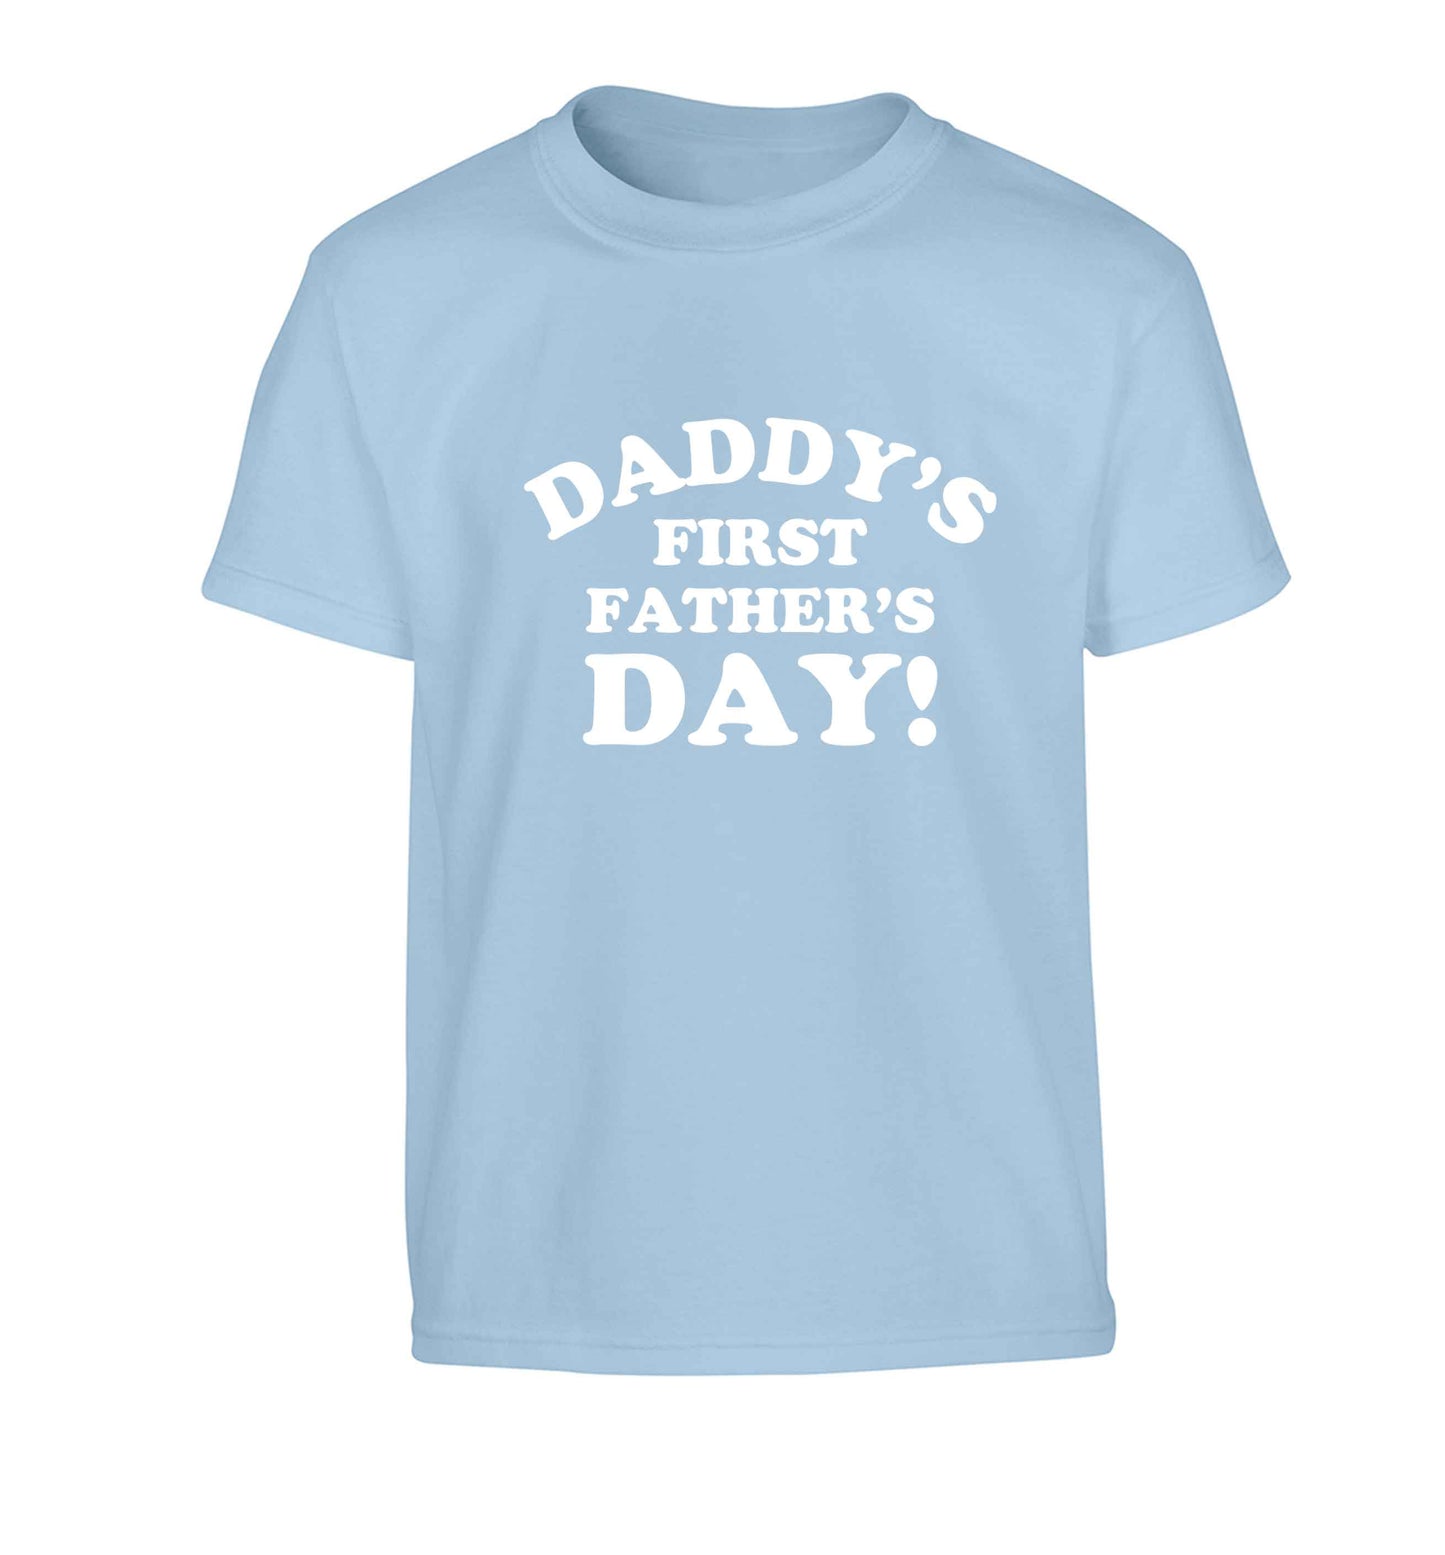 Daddy's first father's day Children's light blue Tshirt 12-13 Years